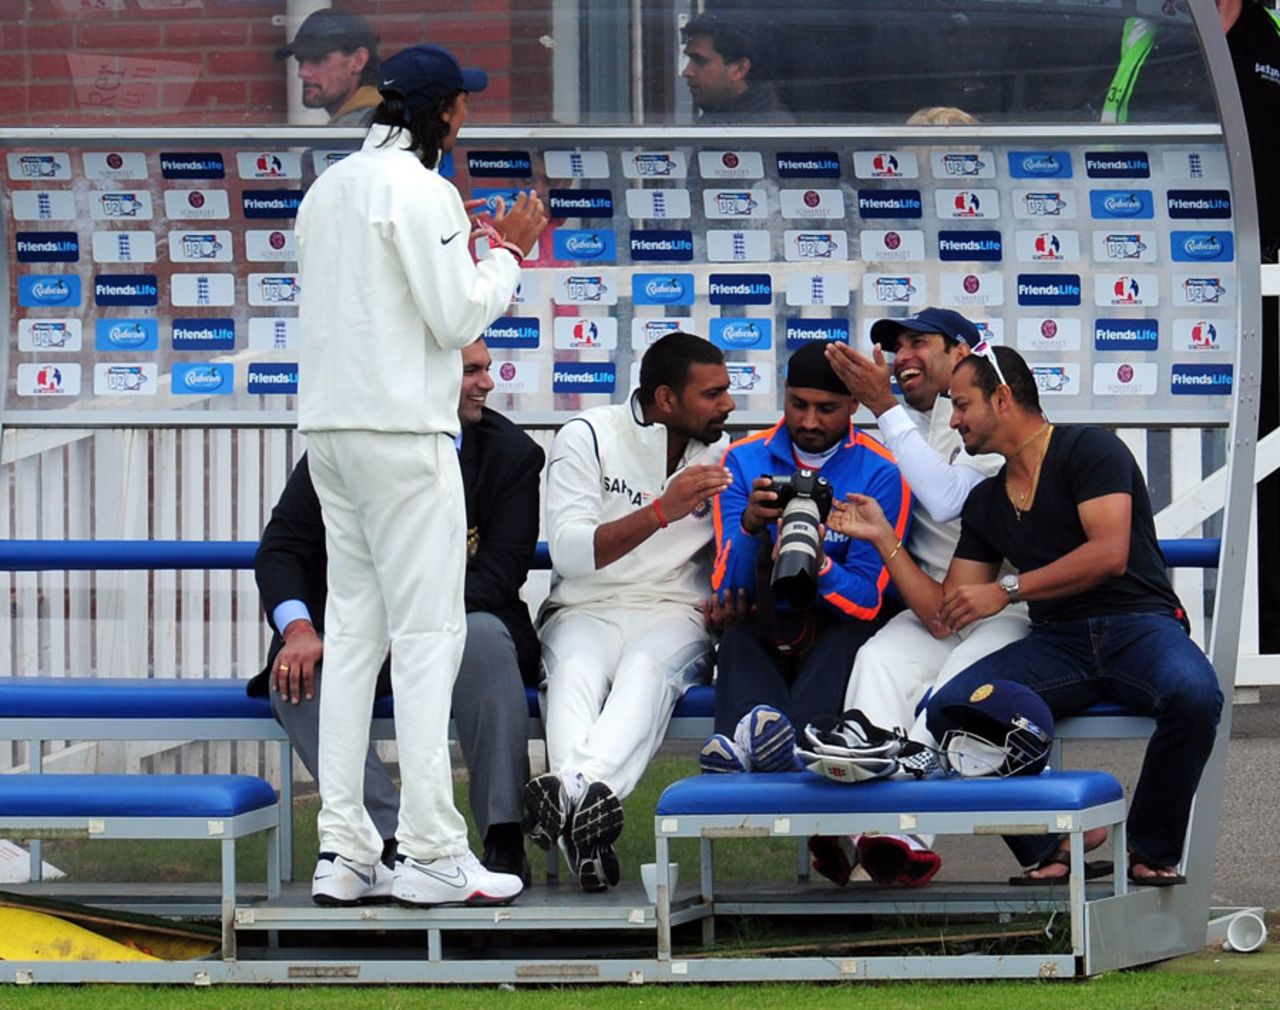 Ishant Sharma shares a laugh with his team-mates, Somerset v Indians, Taunton, 2nd day, July 16, 2011